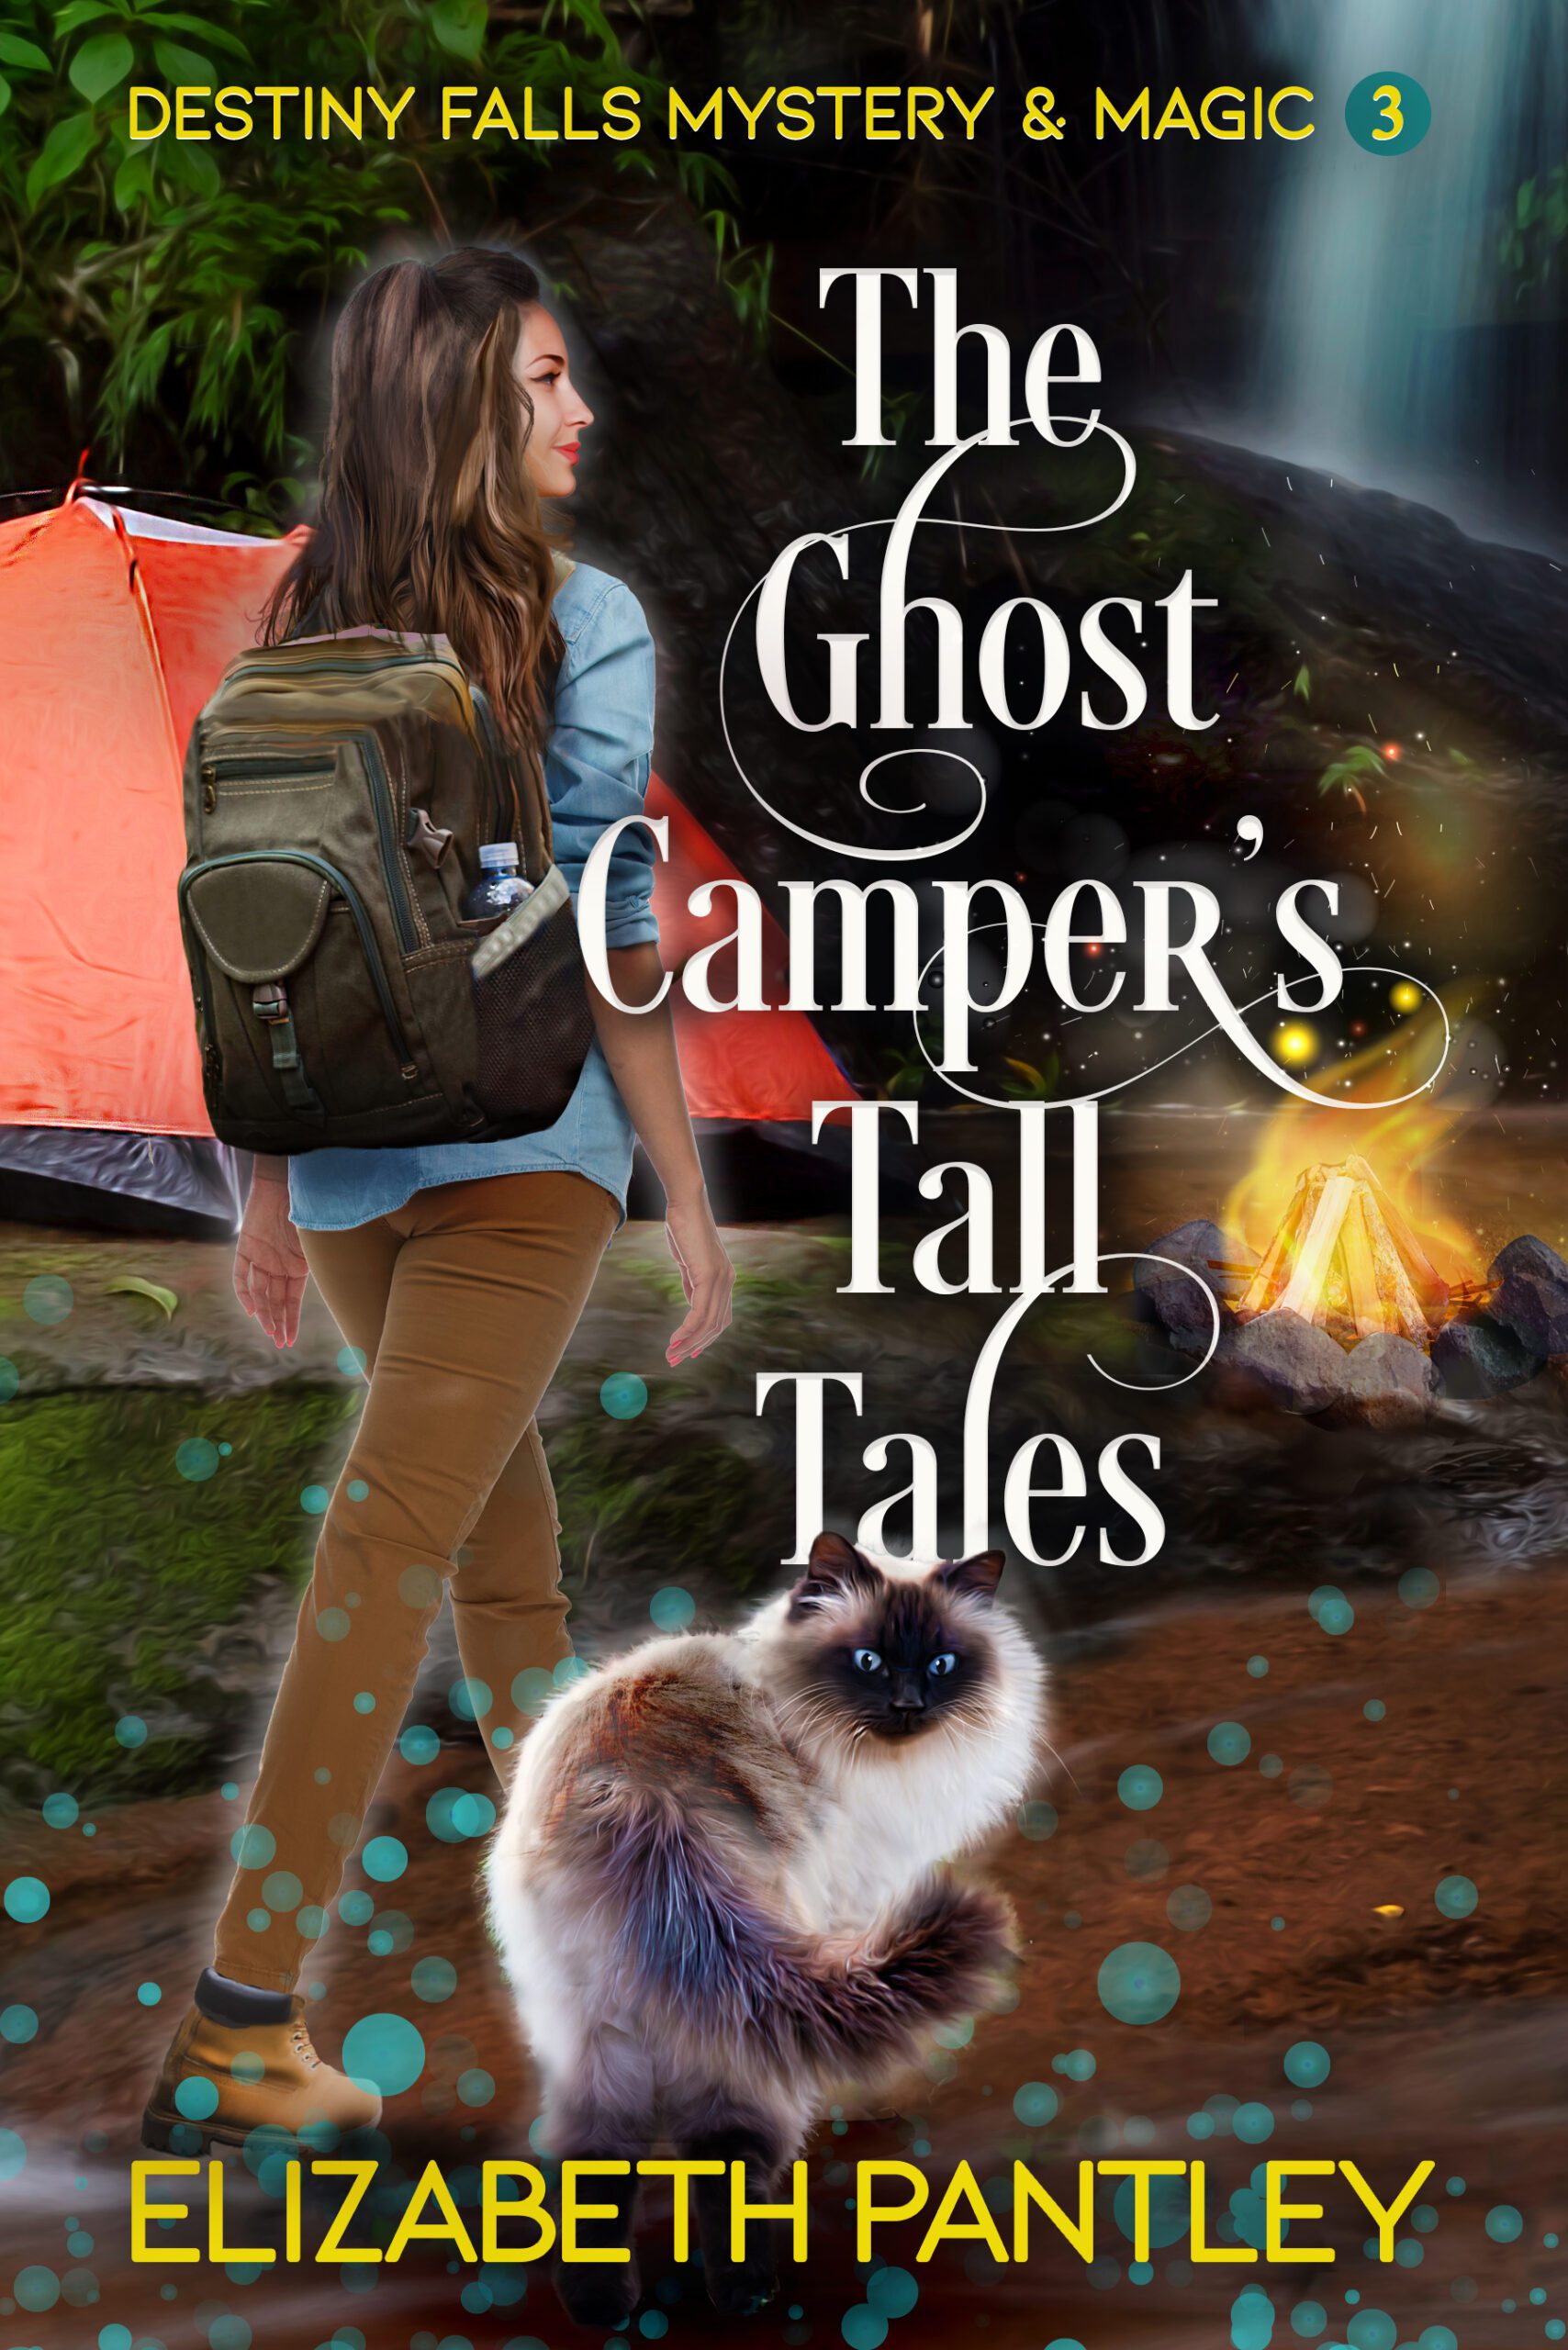 The Ghost Camper's Tall Tales by Elizabeth Pantley